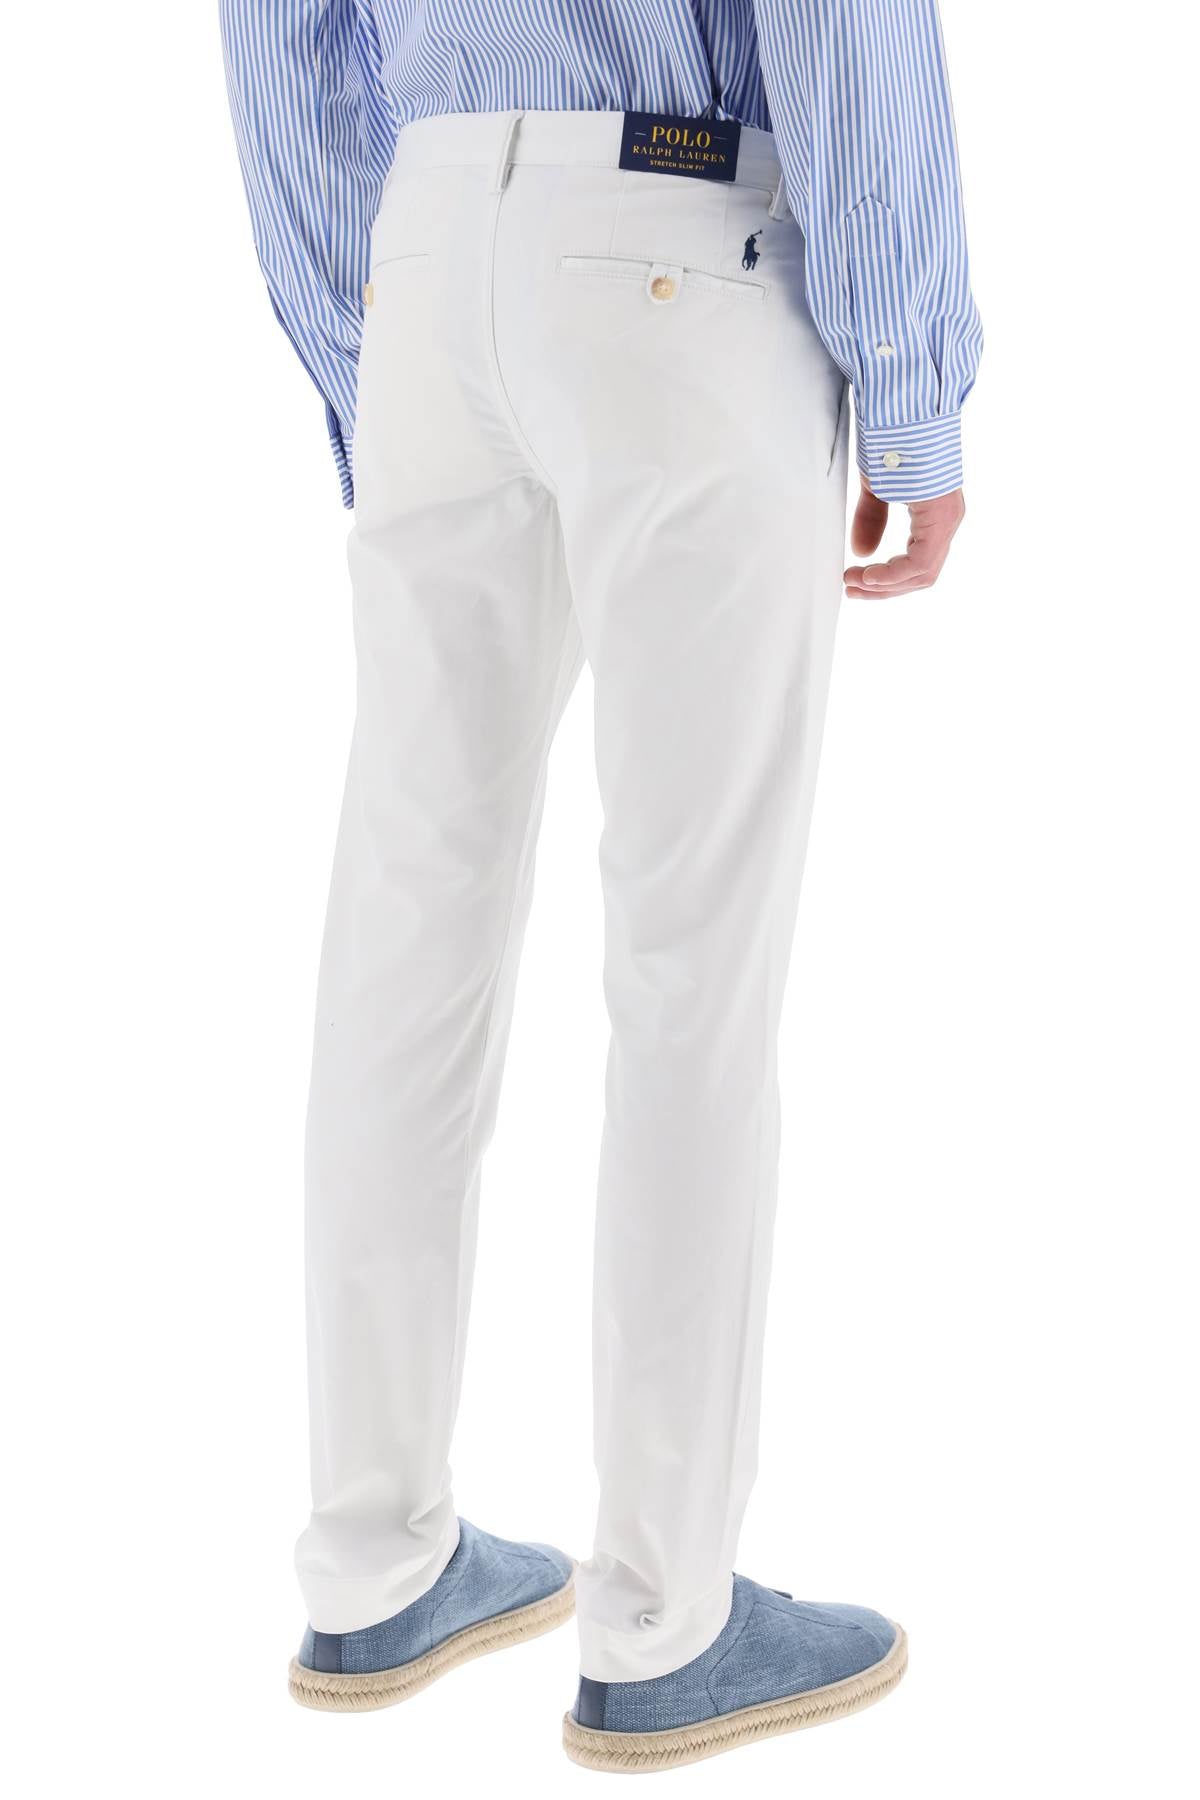 Polo ralph lauren chino pants in cotton-2